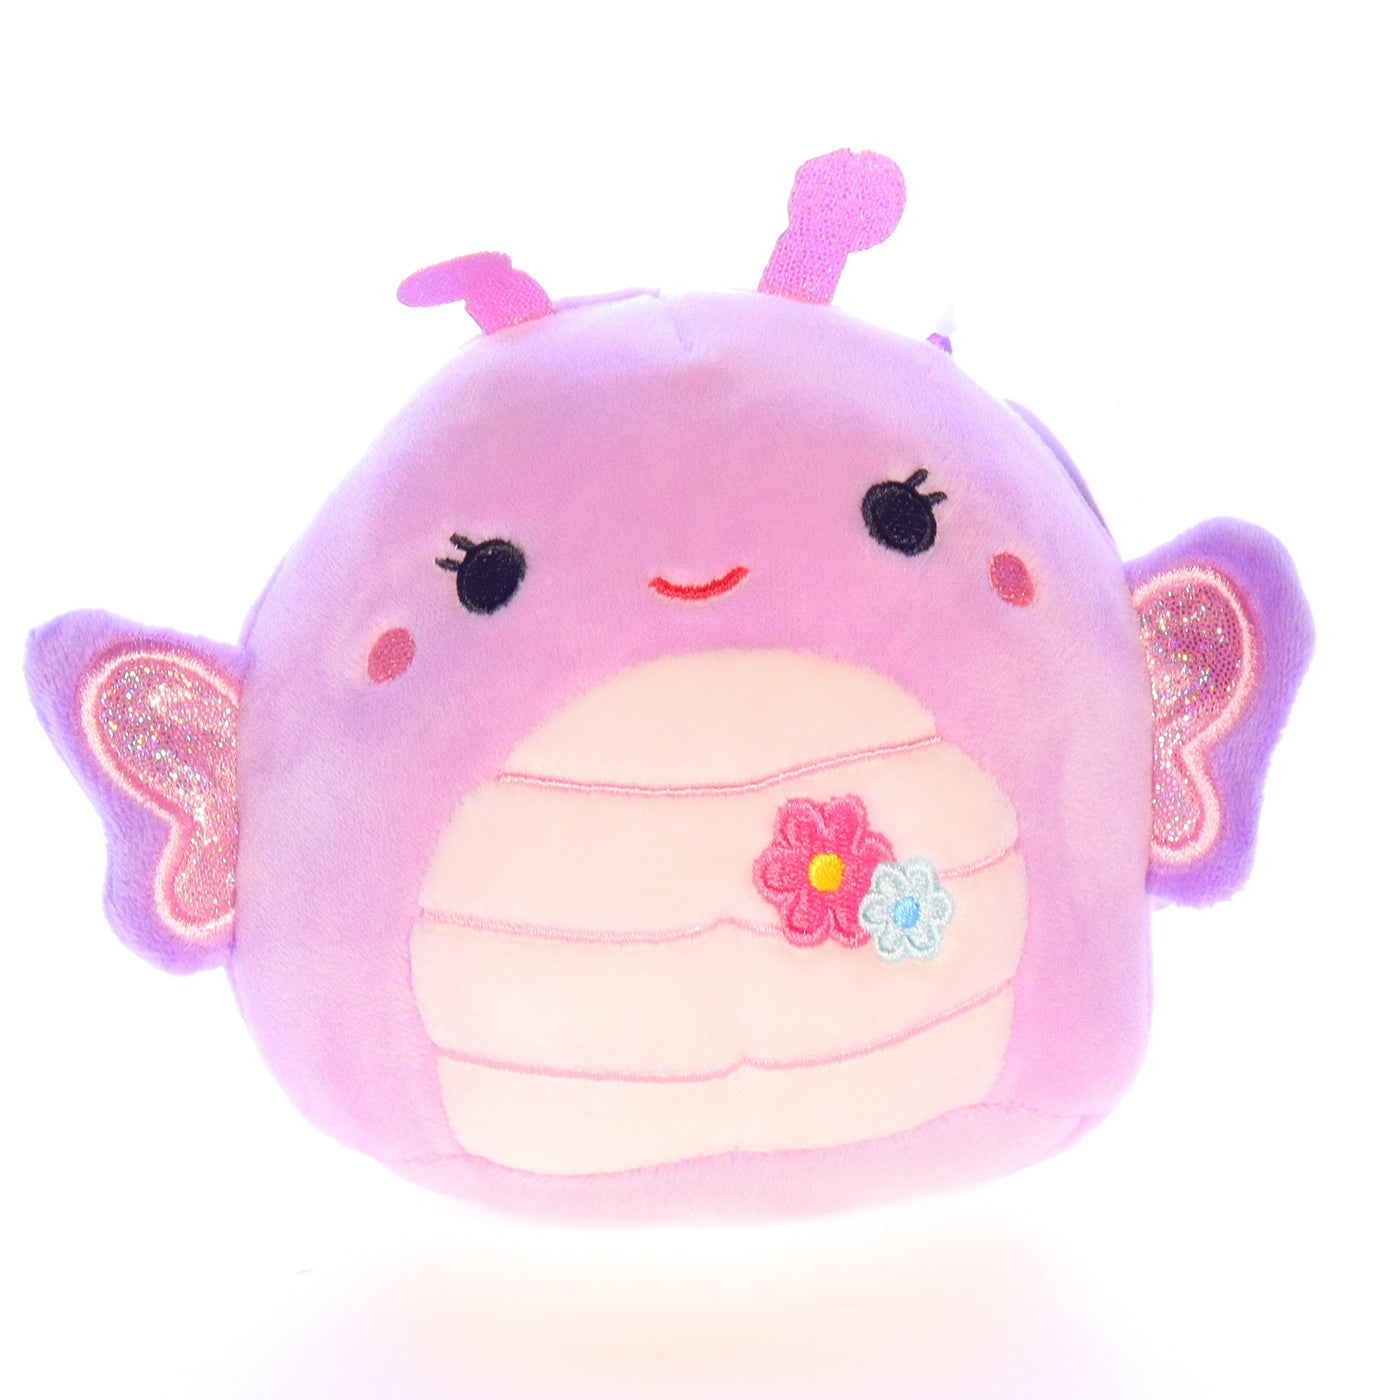 Squishmallows_734689452293_Brenda_Butterfly_Stuffed_Animal_2020 Front View